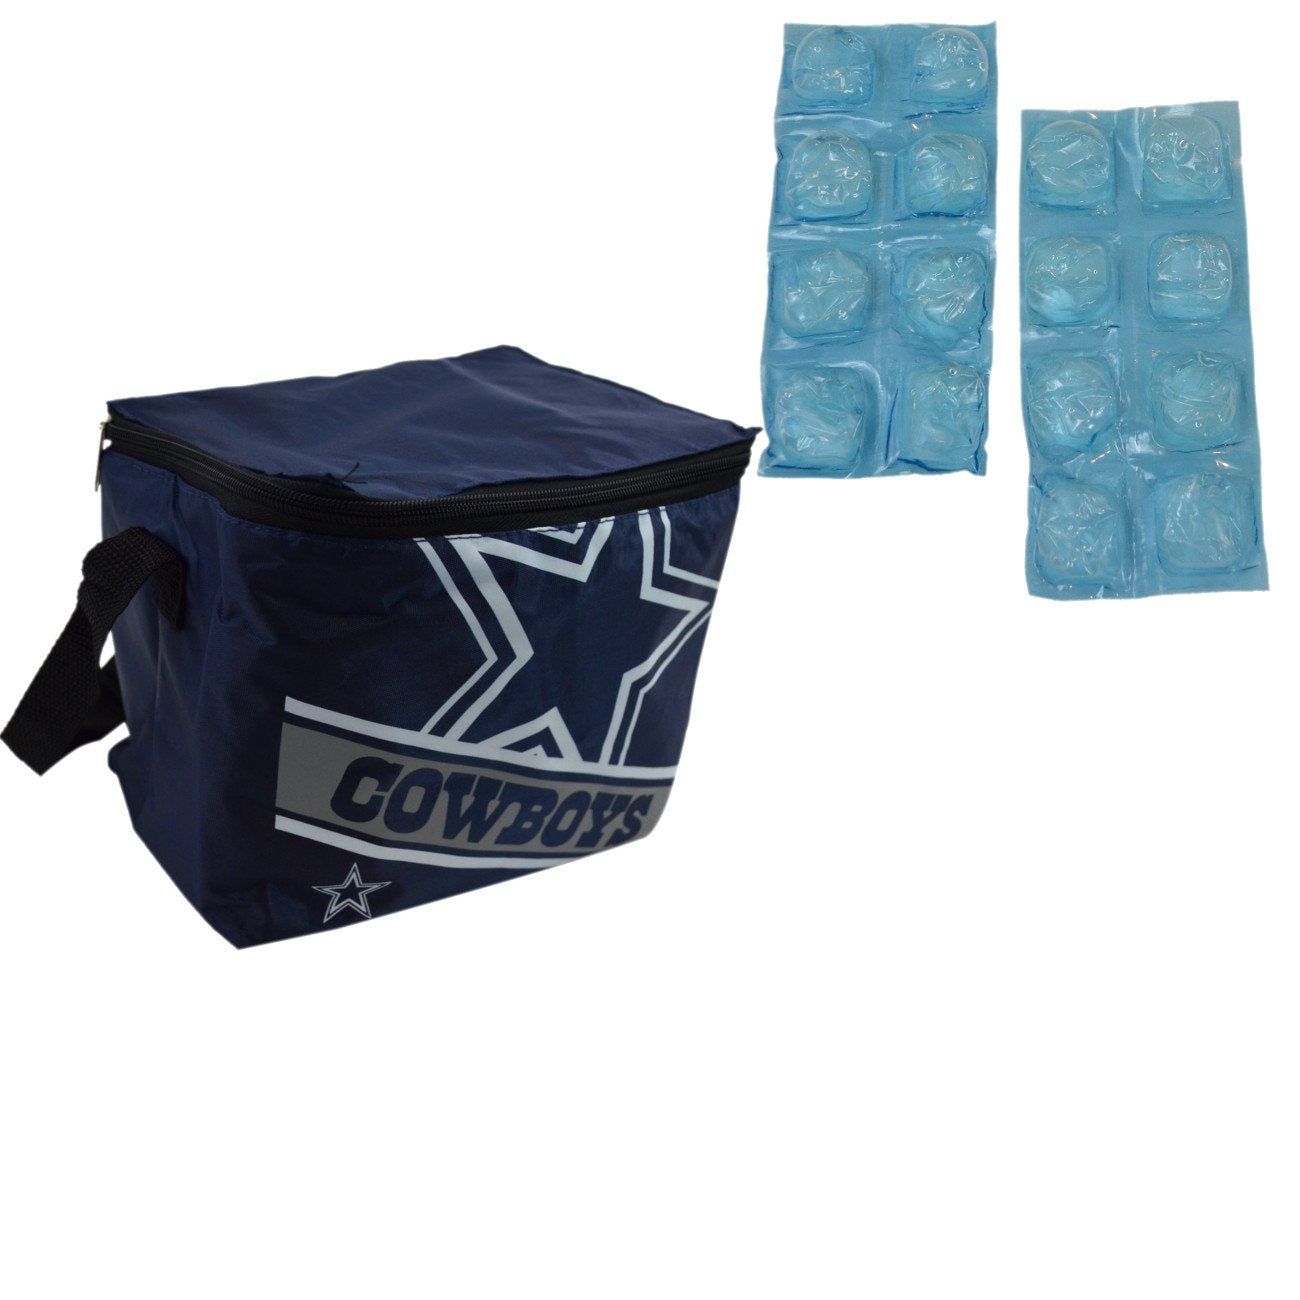 NFL Shop Collapsible Insulated Lunch Bag with Re-freezable Ice Packs Bundle